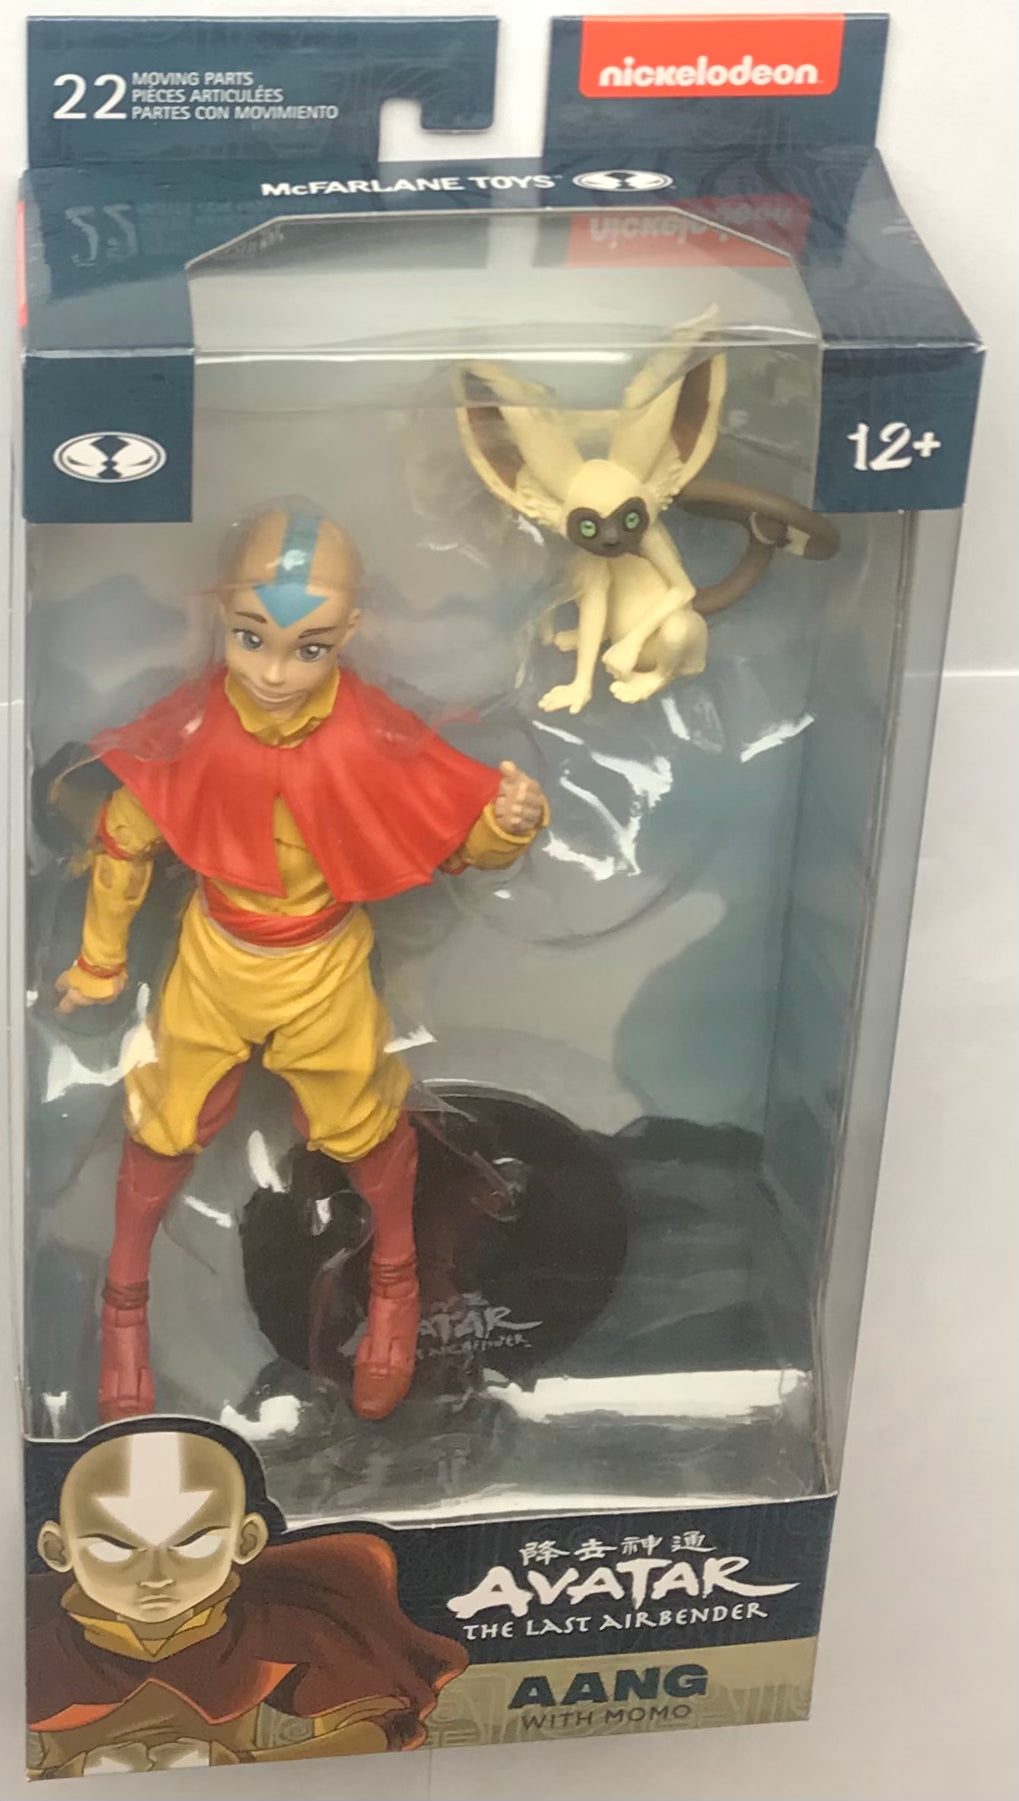 McFarlane Avatar: The Last Airbender Aang with Momo 6” Inch Action Figure